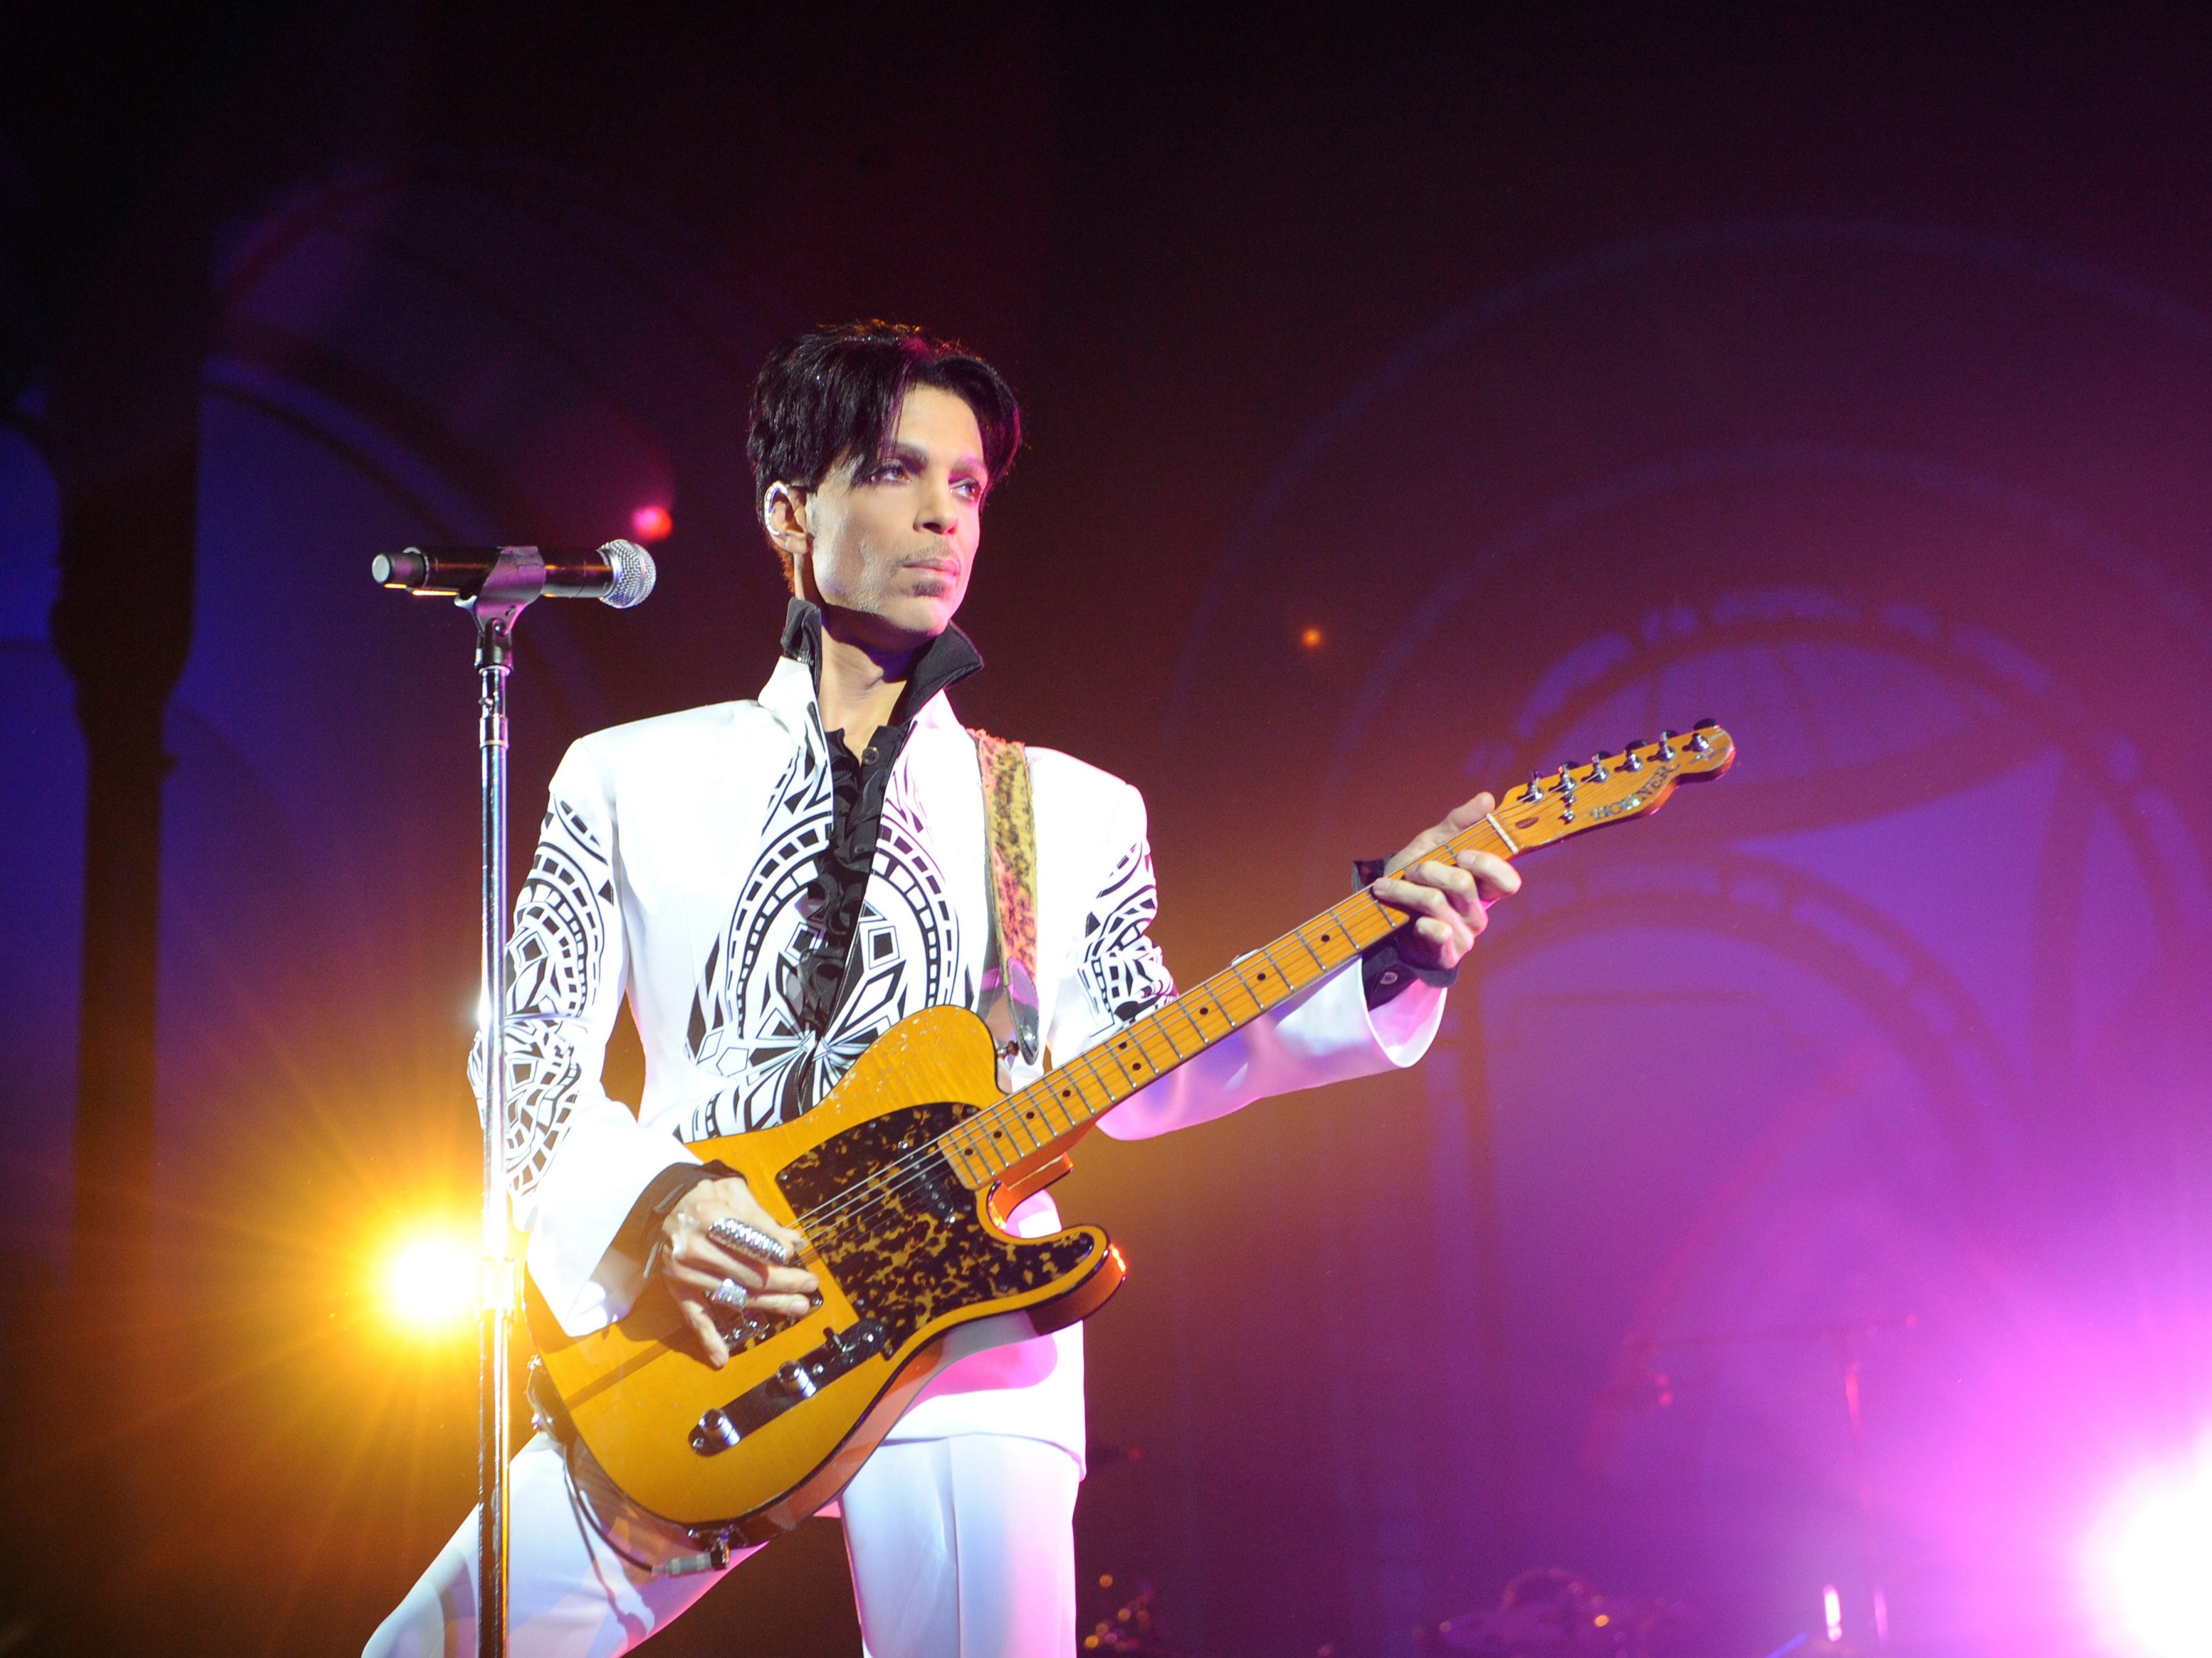 Prince performing in 2011